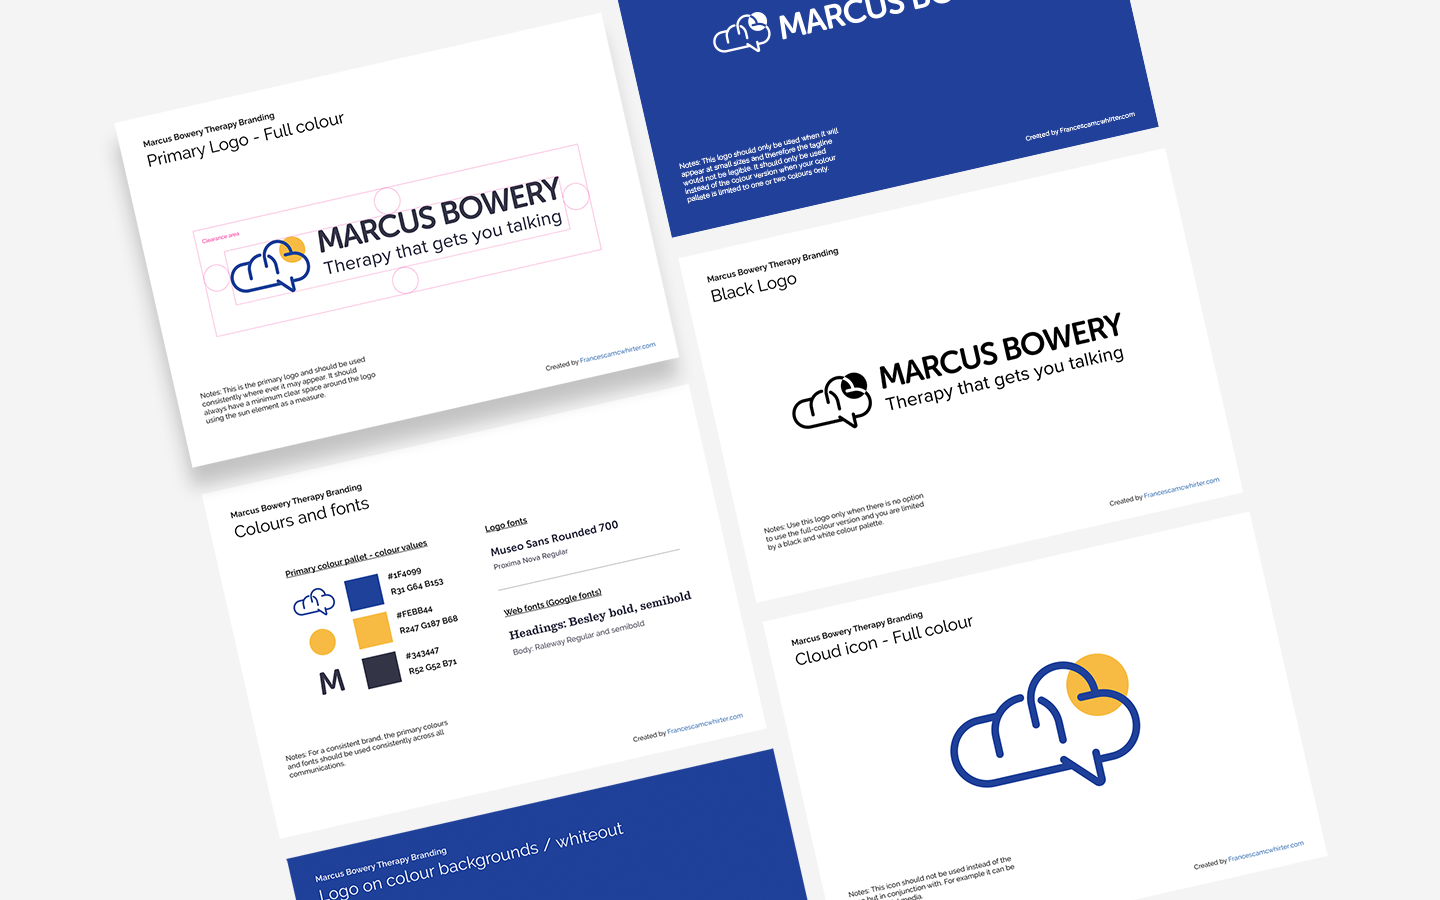 marcus bowery therapy -brand guidelines